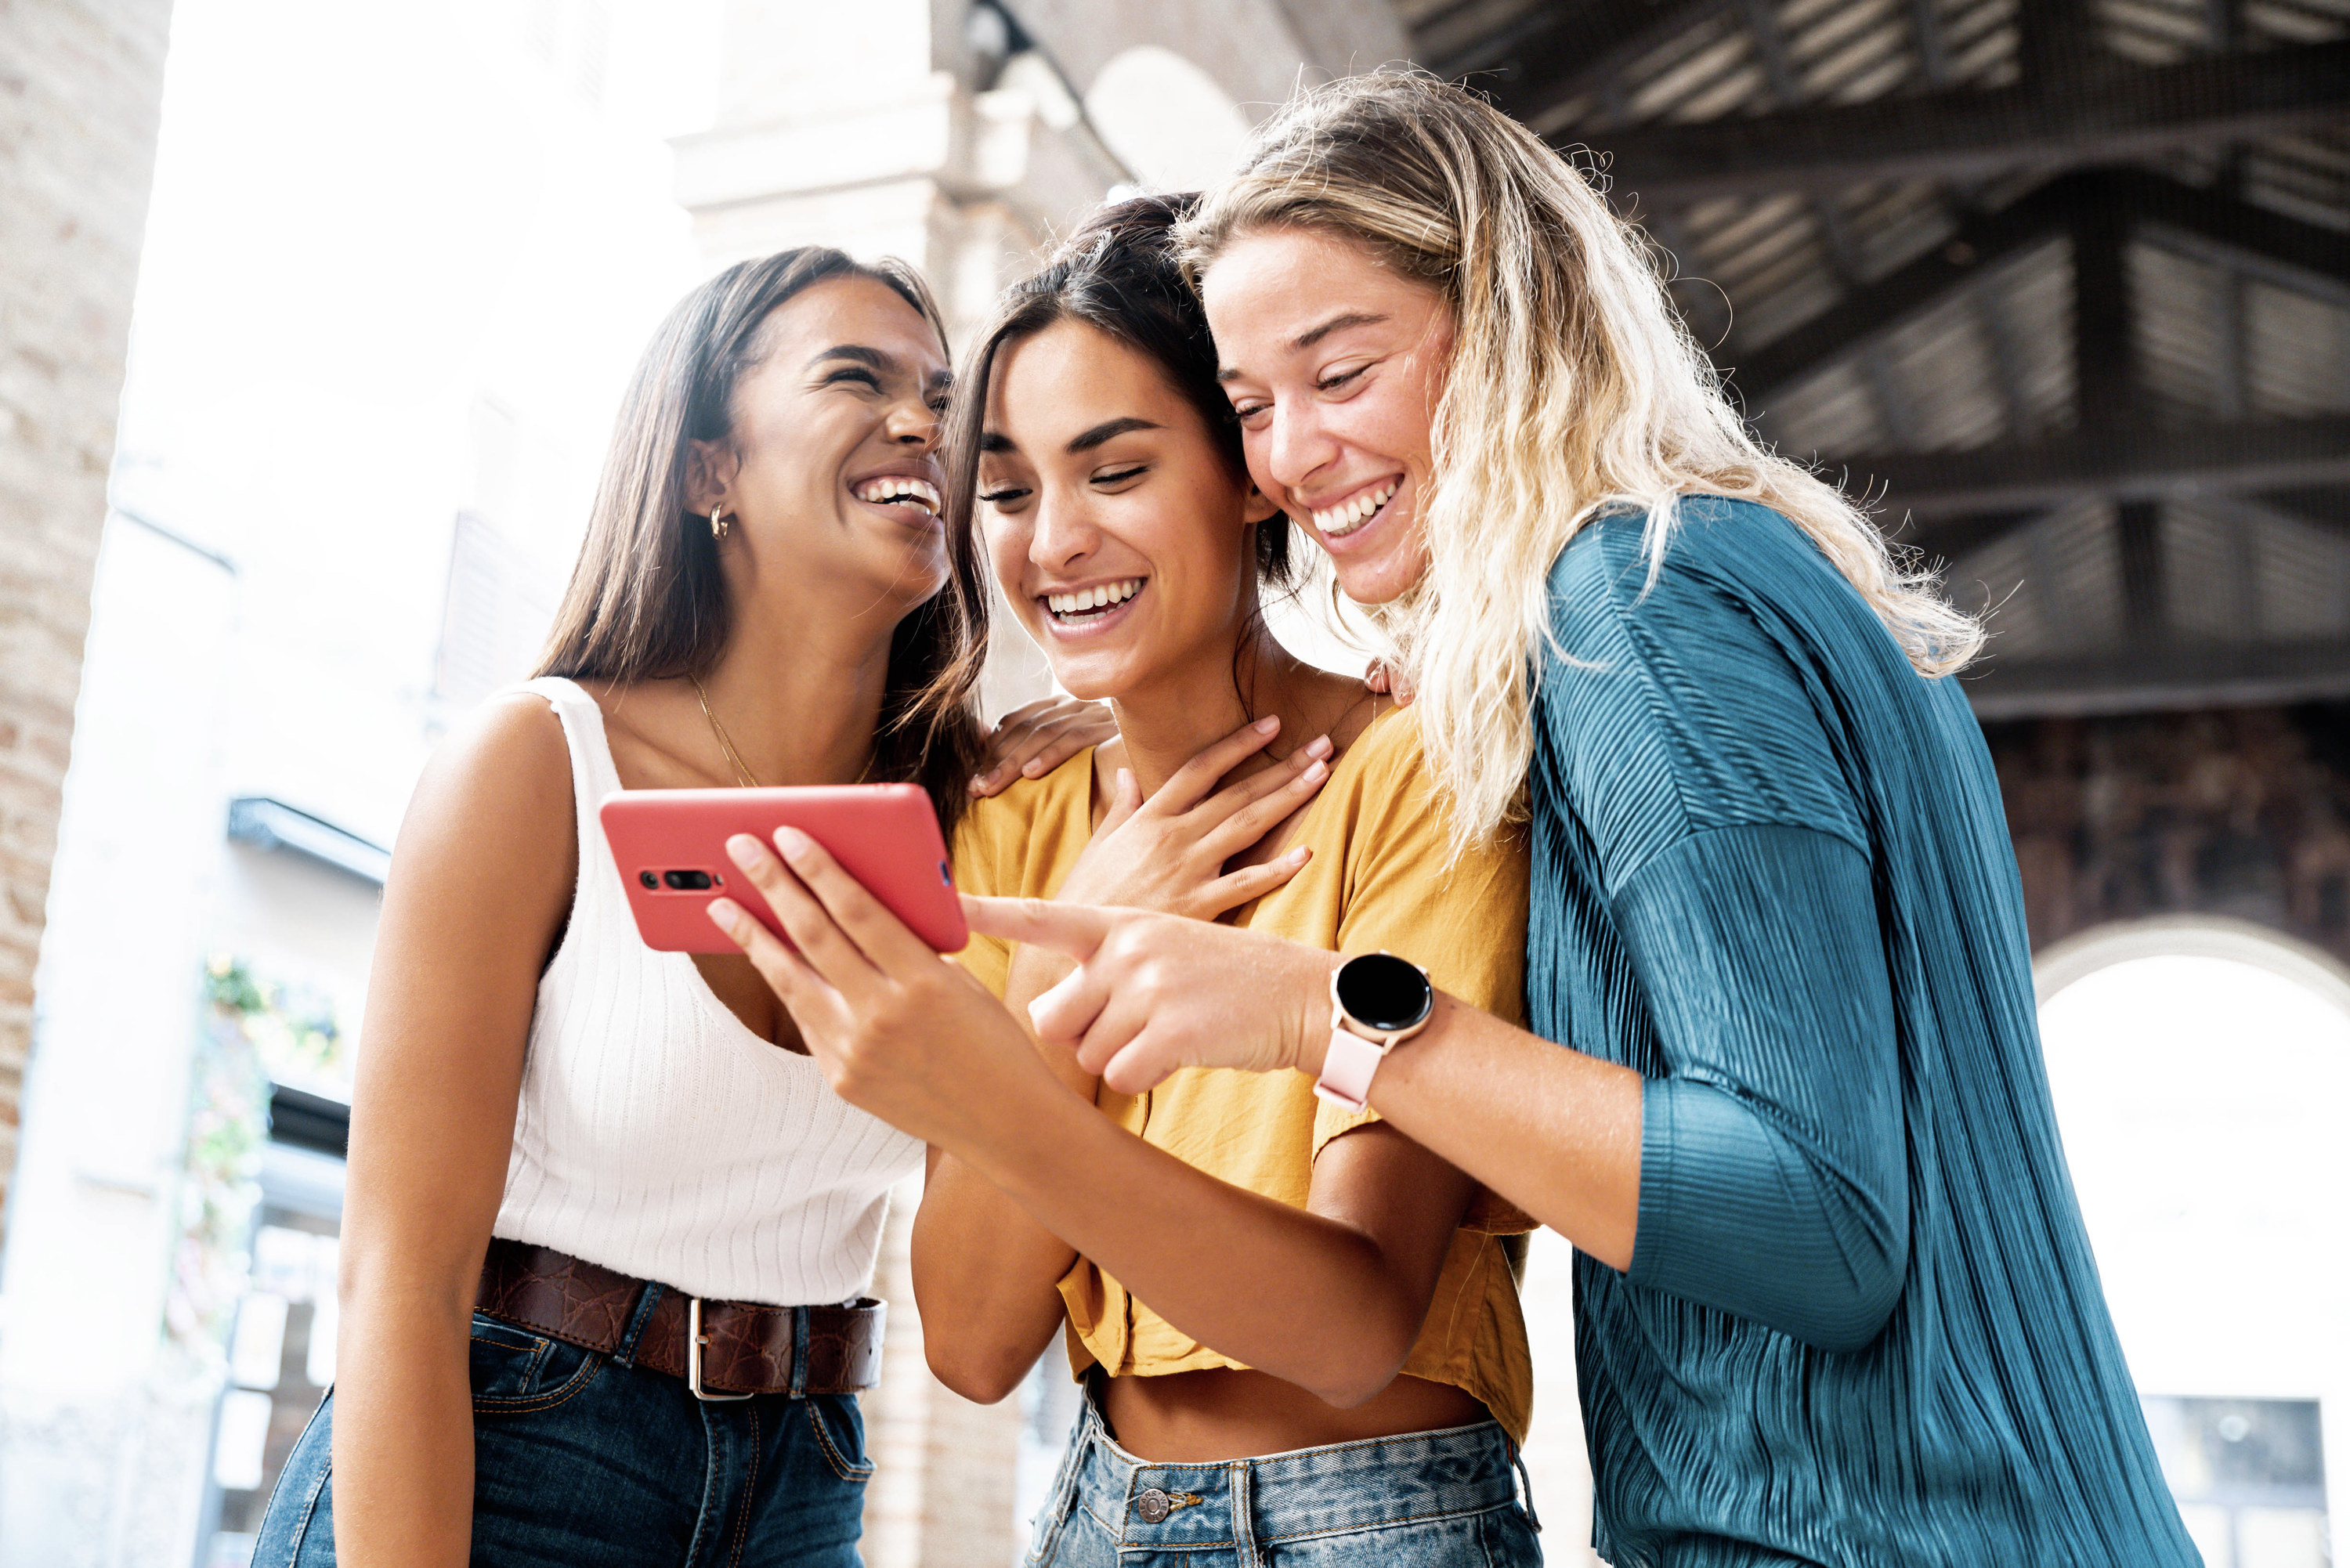 three female friends smiling and looking at a phone together